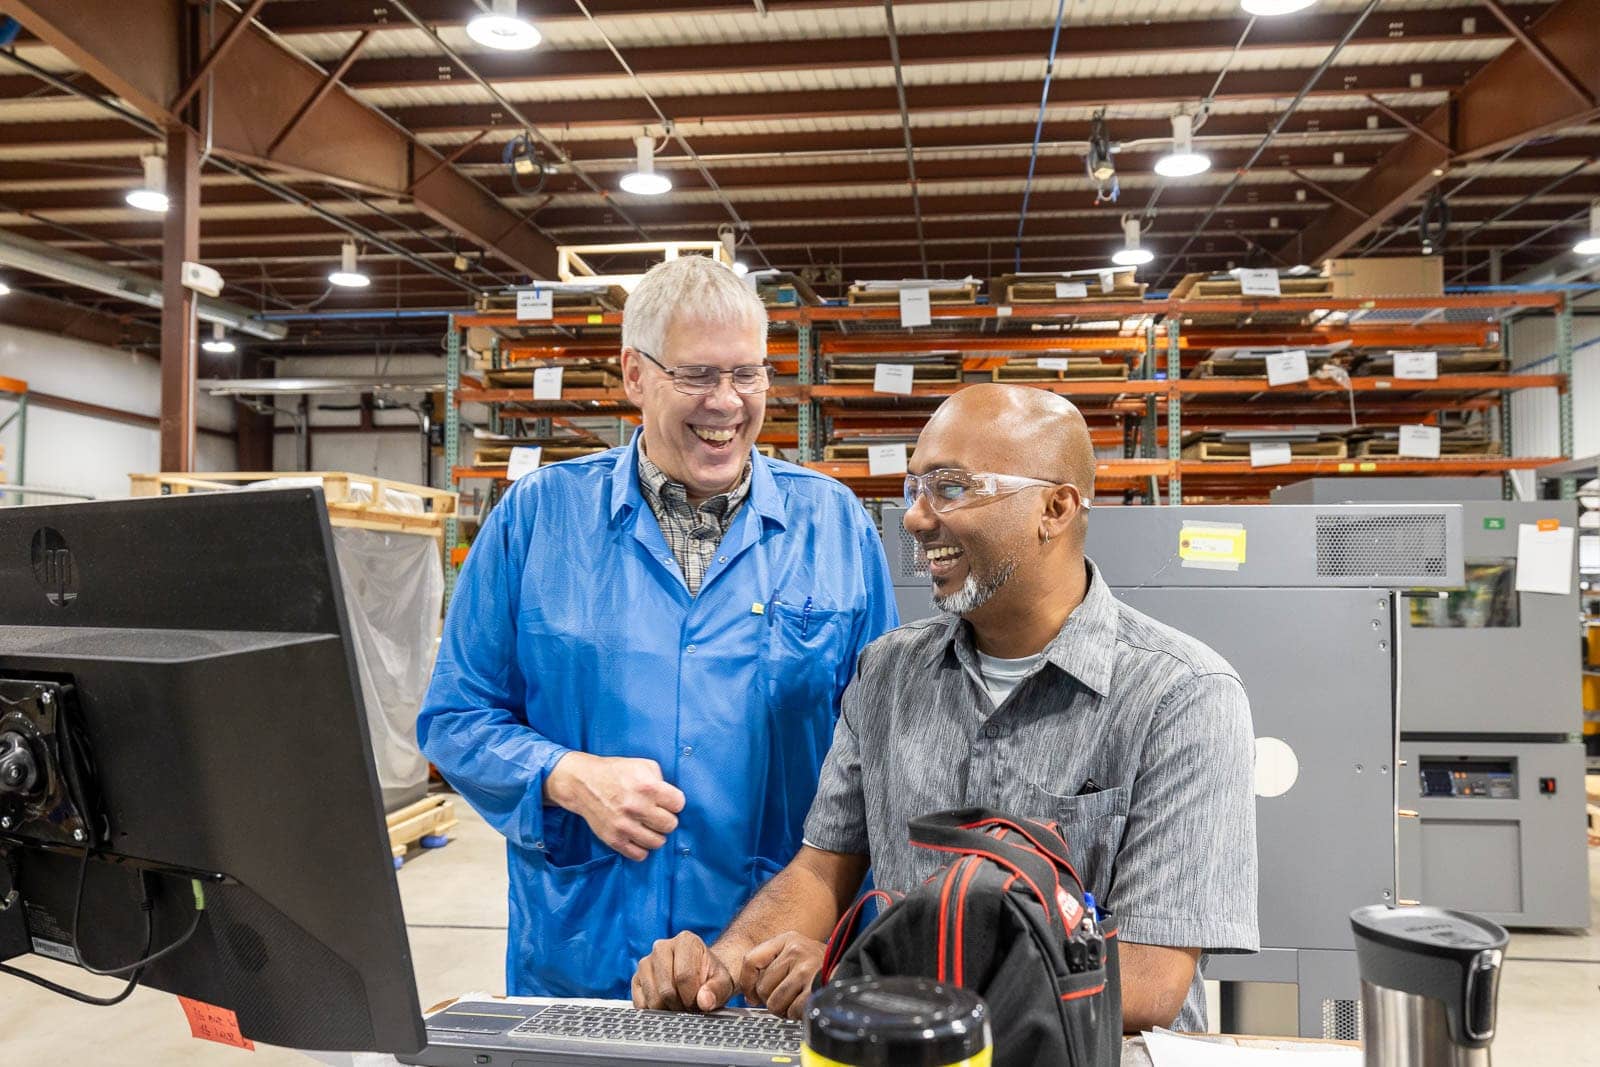 RIS employees are experts in their field and dedicated to continuous improvement. Our lean manufacturing processes guarantee the best manufacturing experience for our customers.